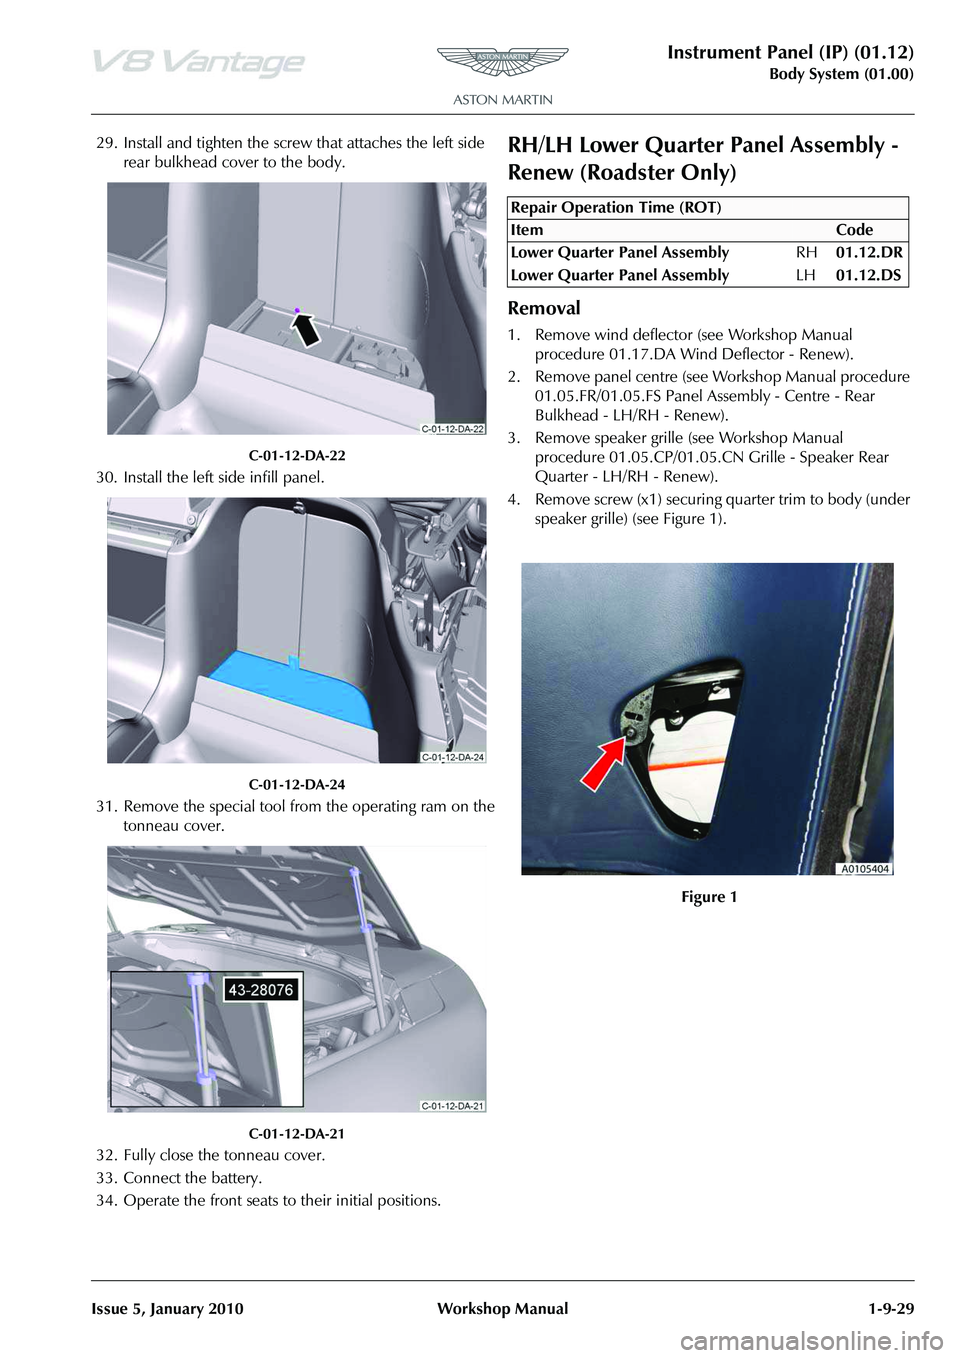 ASTON MARTIN V8 VANTAGE 2010 Owners Guide Instrument Panel (IP) (01.12)
Body System (01.00)
Issue 5, January 2010 Workshop Manual 1-9-29
29. Install and tighten the screw that attaches the left side  rear bulkhead cover to the body.
C-01-12-D